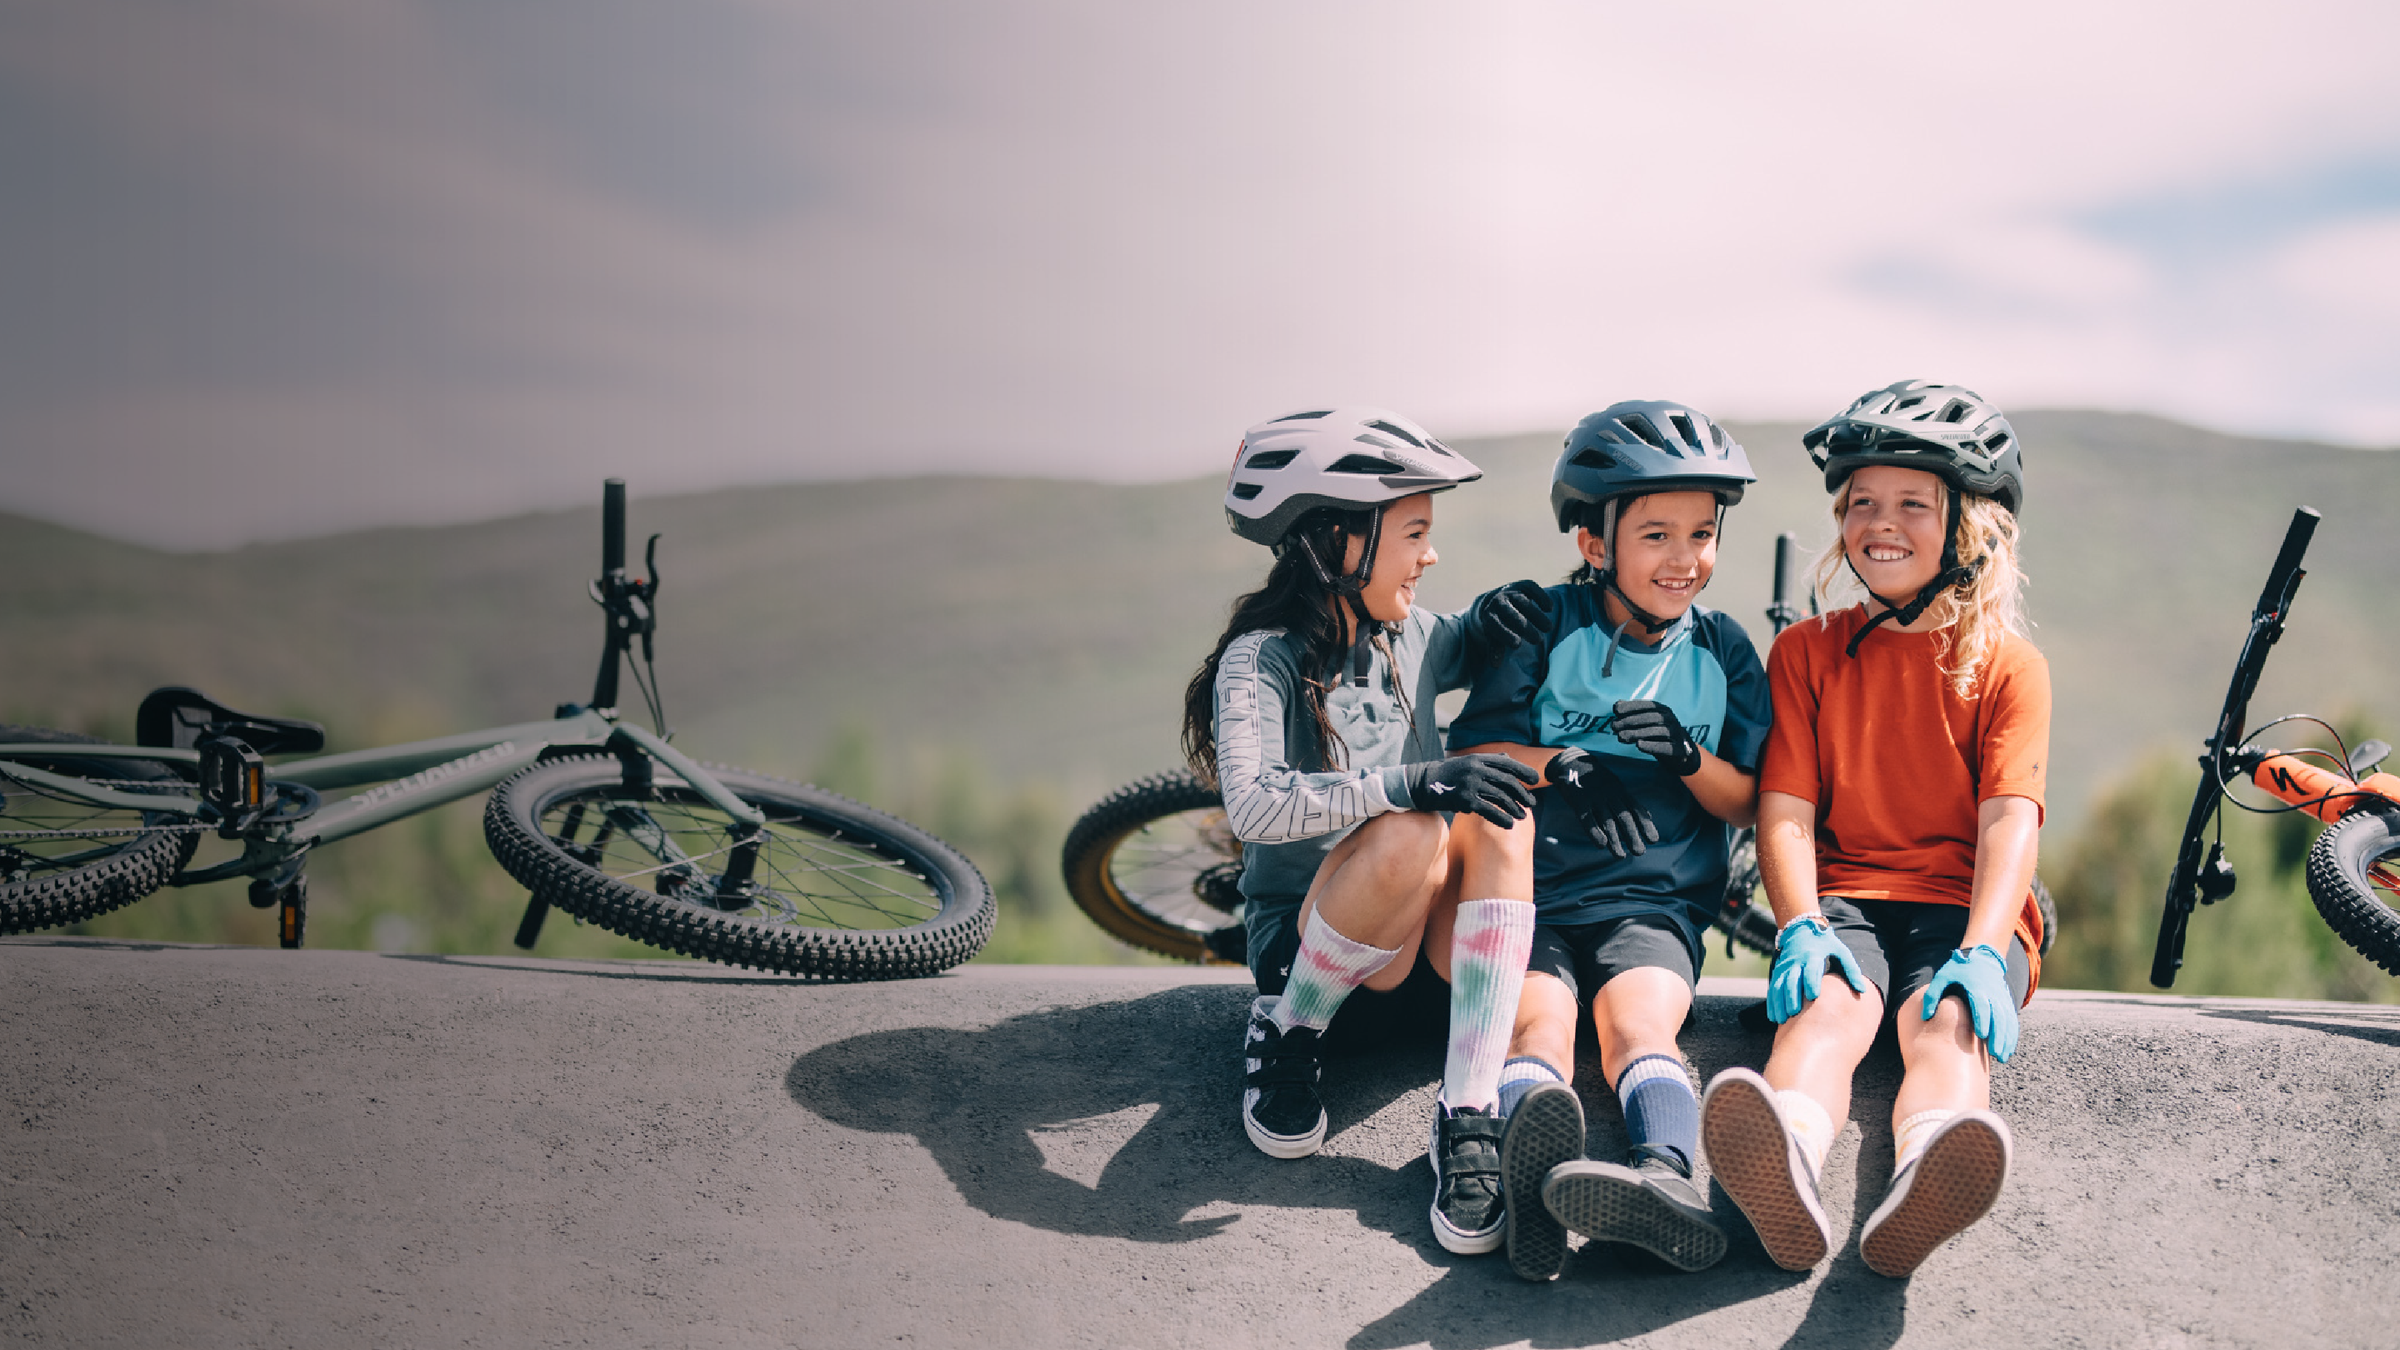 Cycling Apparel and clothing for kids, youth and children